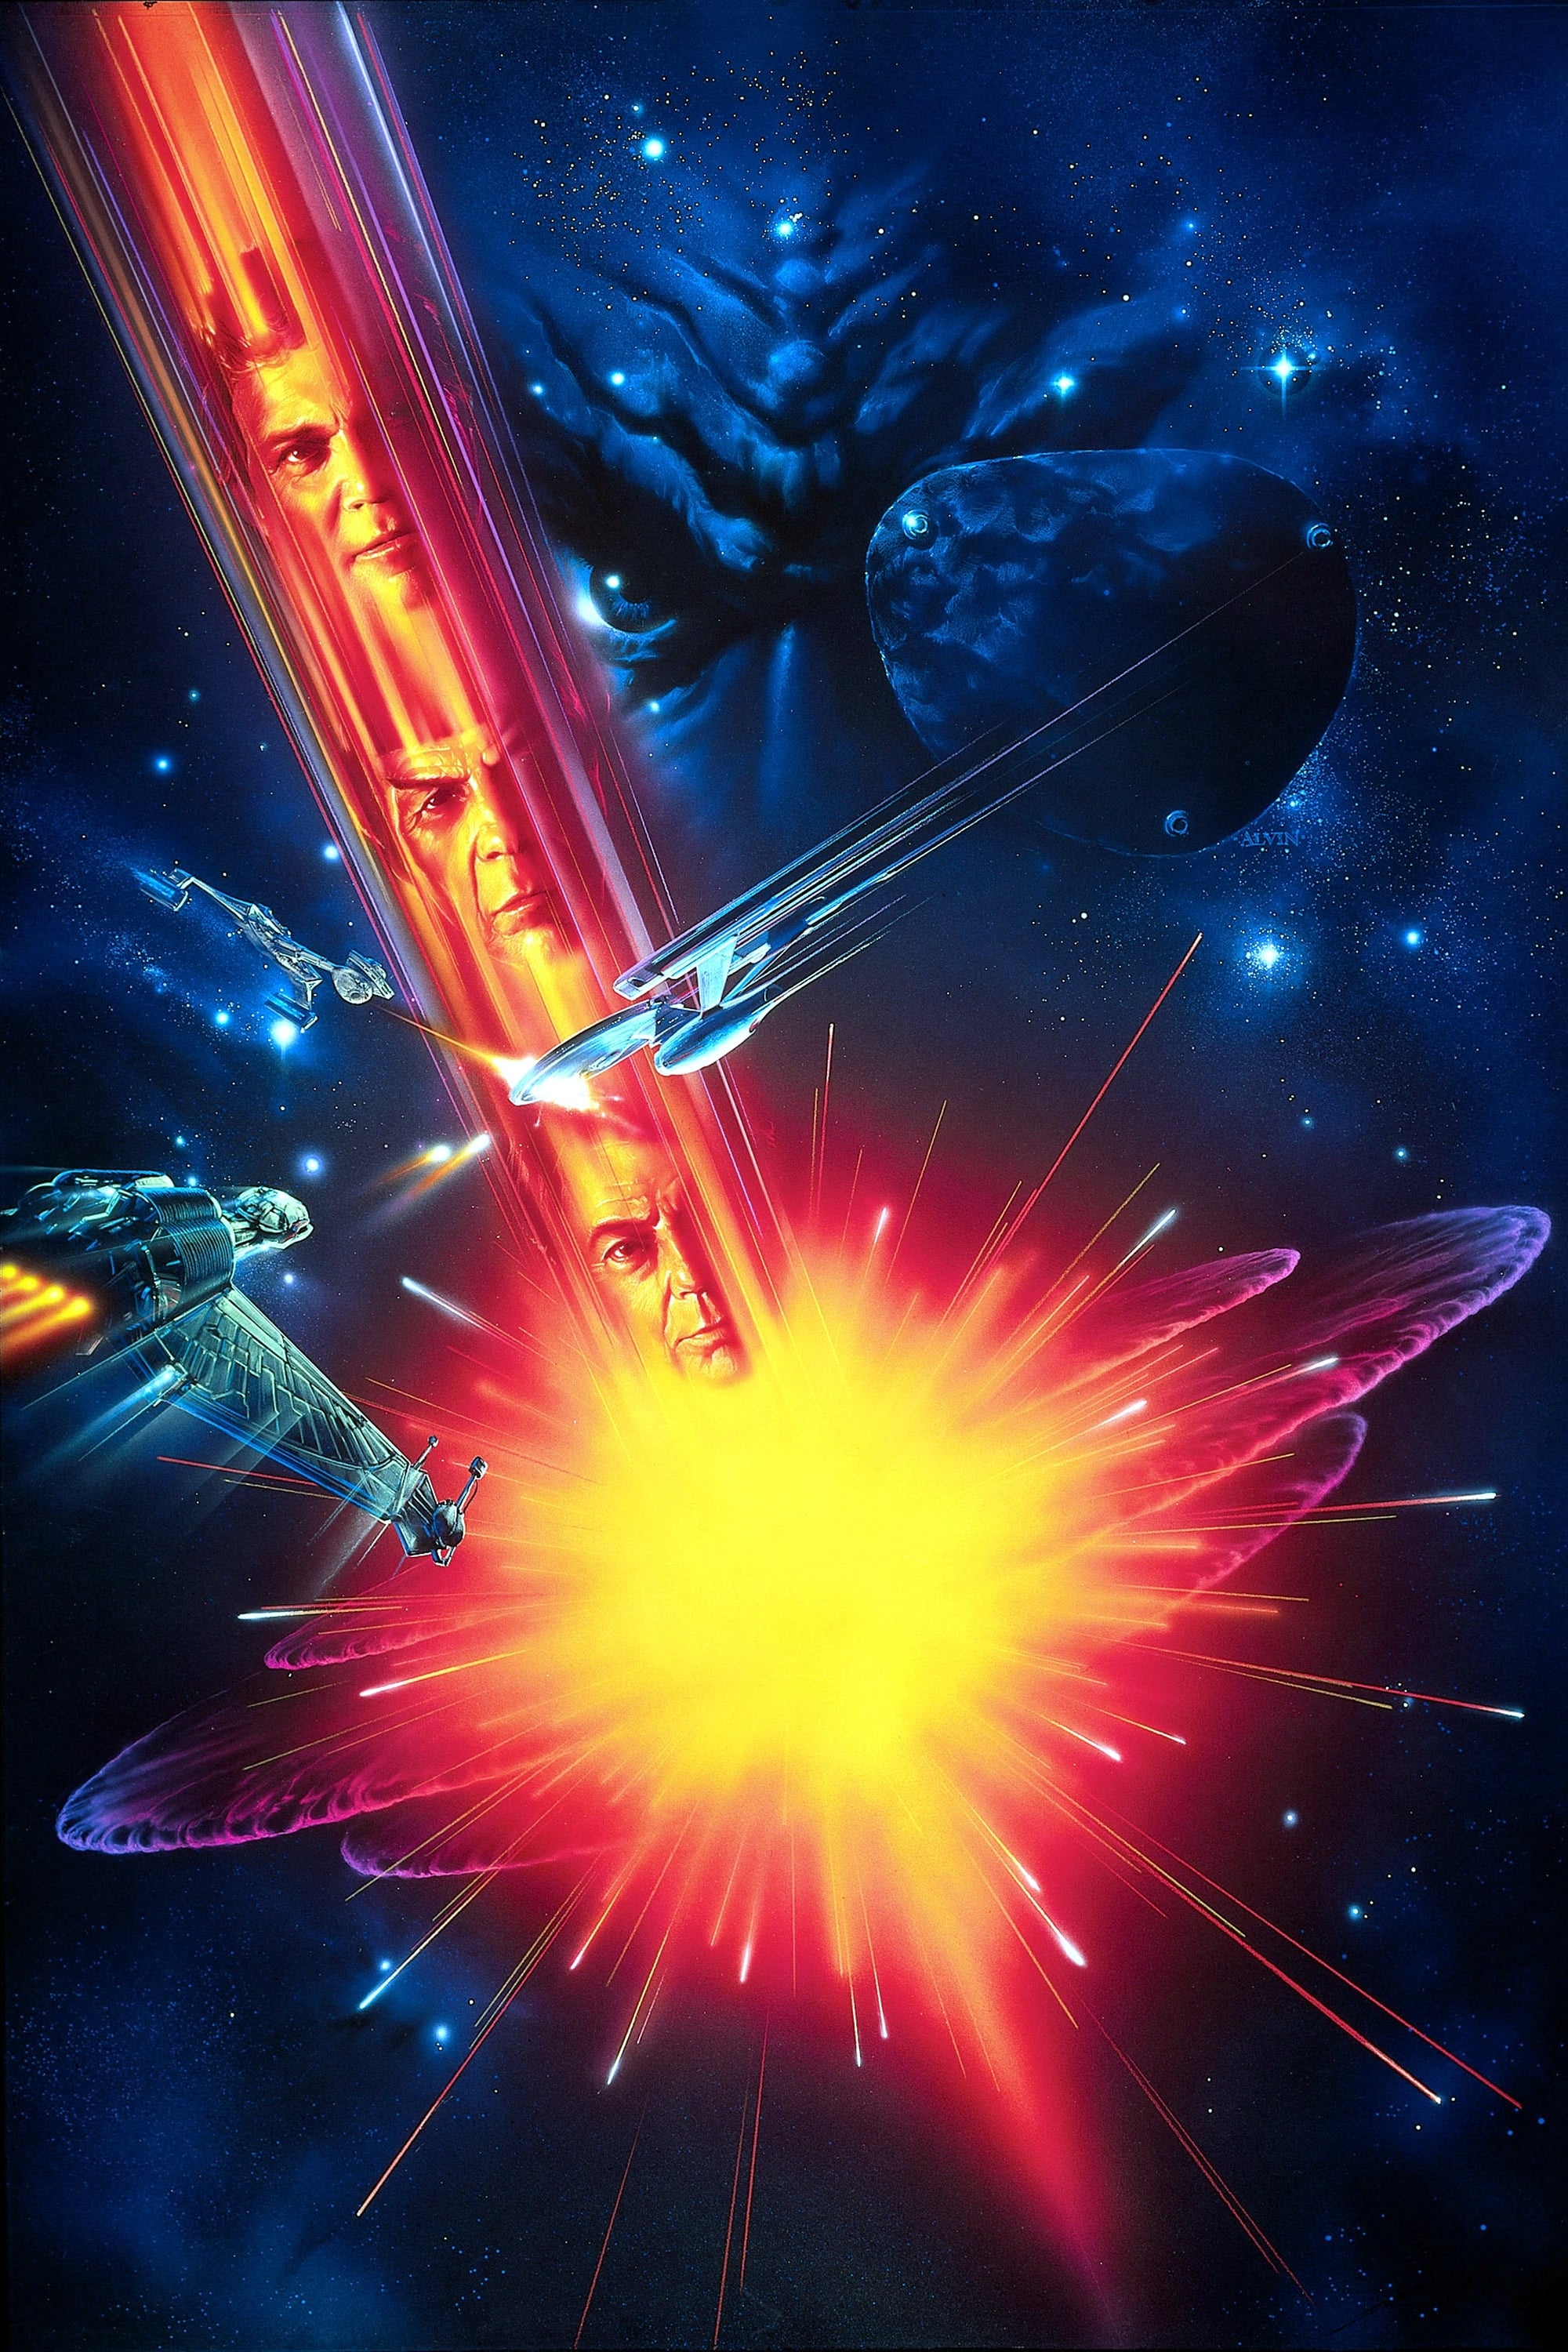 Star Trek VI: The Undiscovered Country POSTER